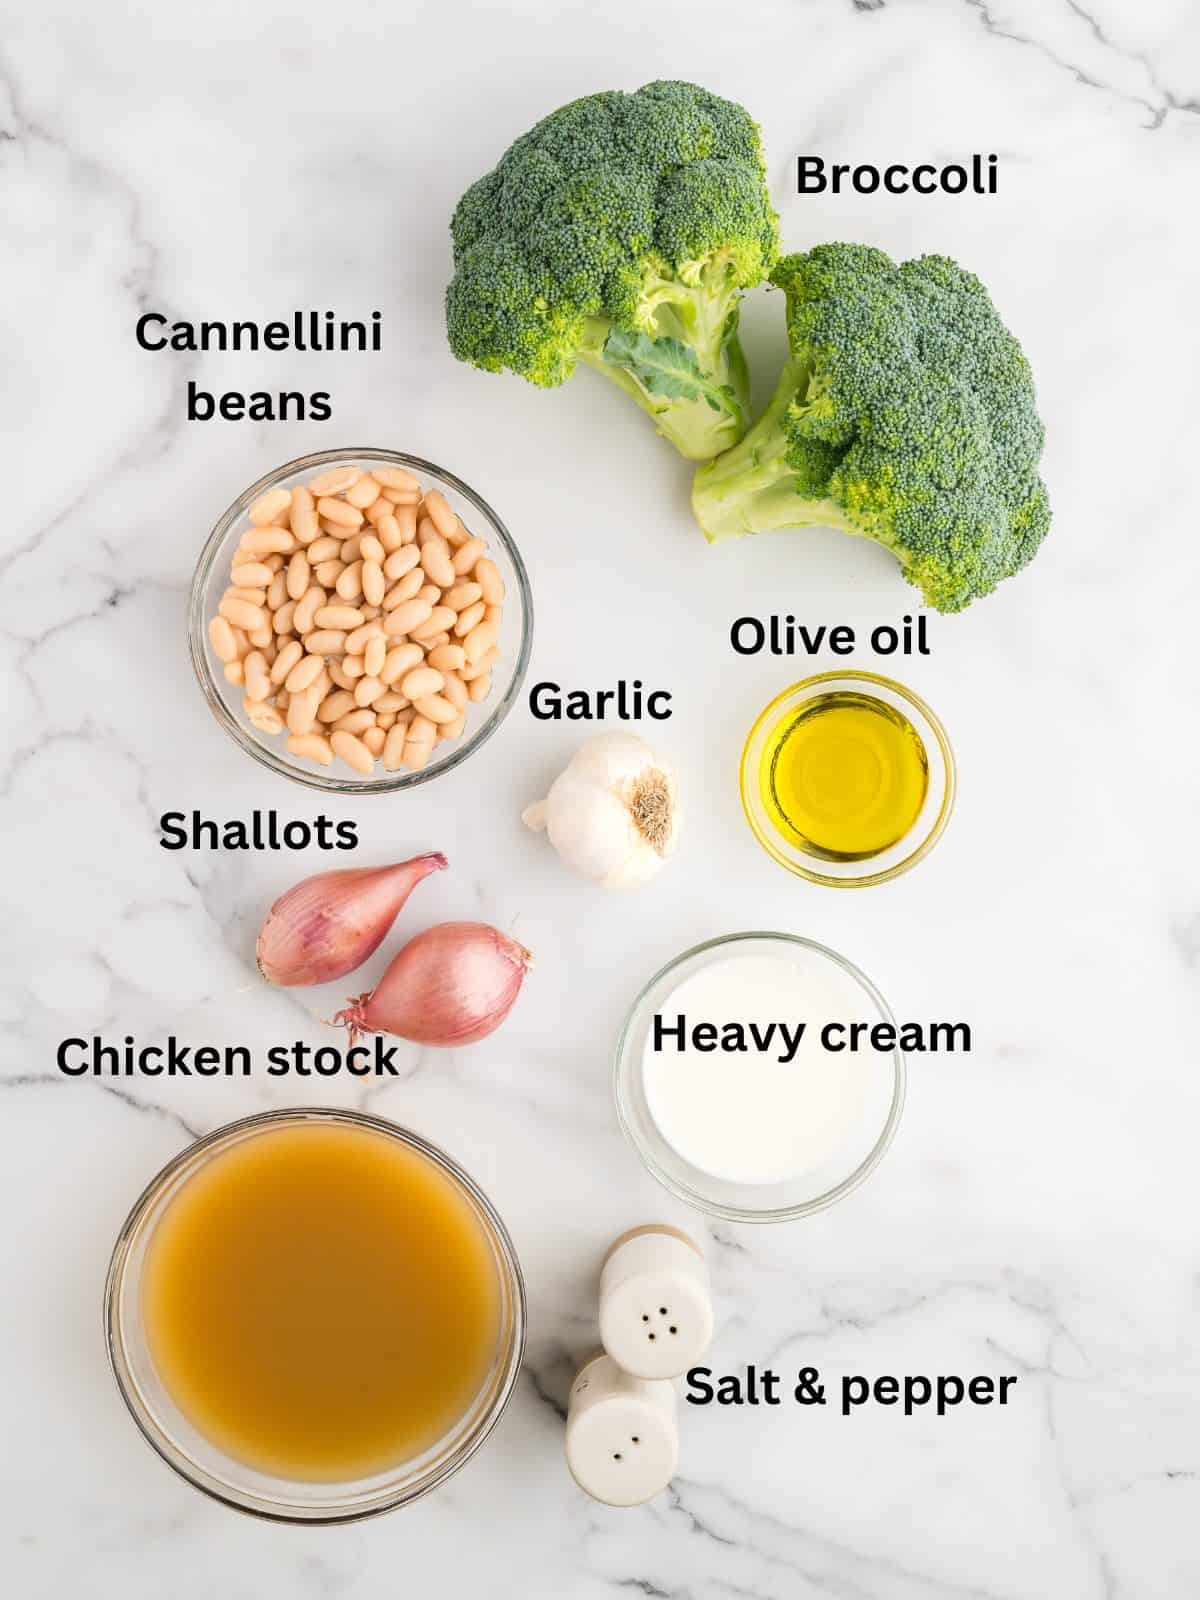 Ingredients for white bean soup include broccoli, white beans, and chicken stock. 